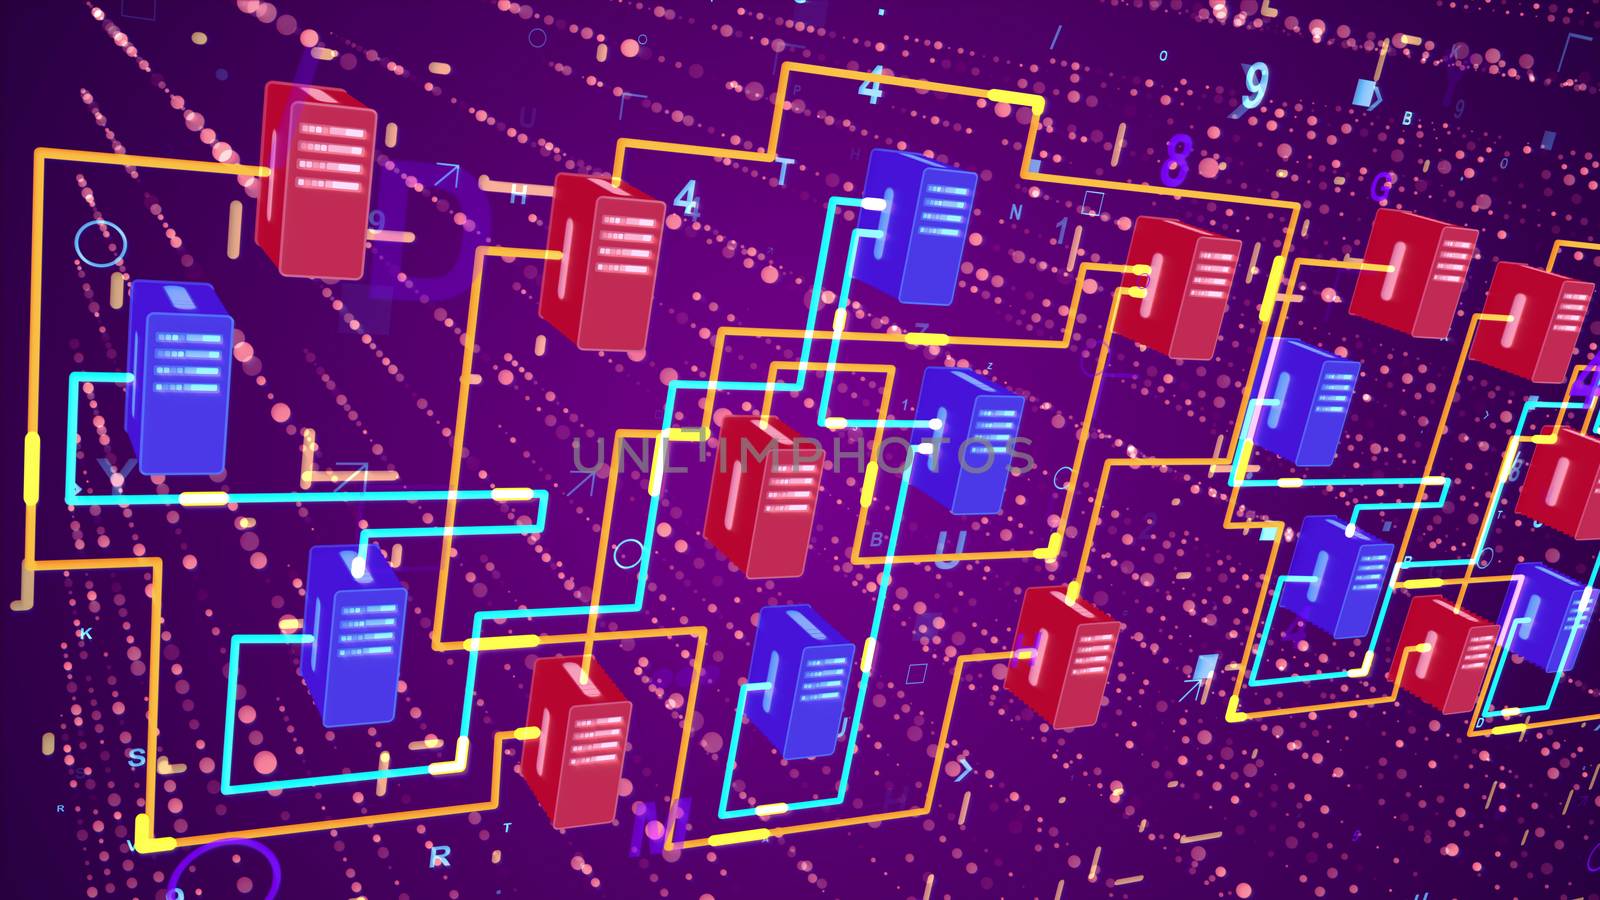 Superior 3d rendering of big data transfer through orange and blue lines, red and dark blue devices placed aslant. It happens in the violet background with bright spots and signs.